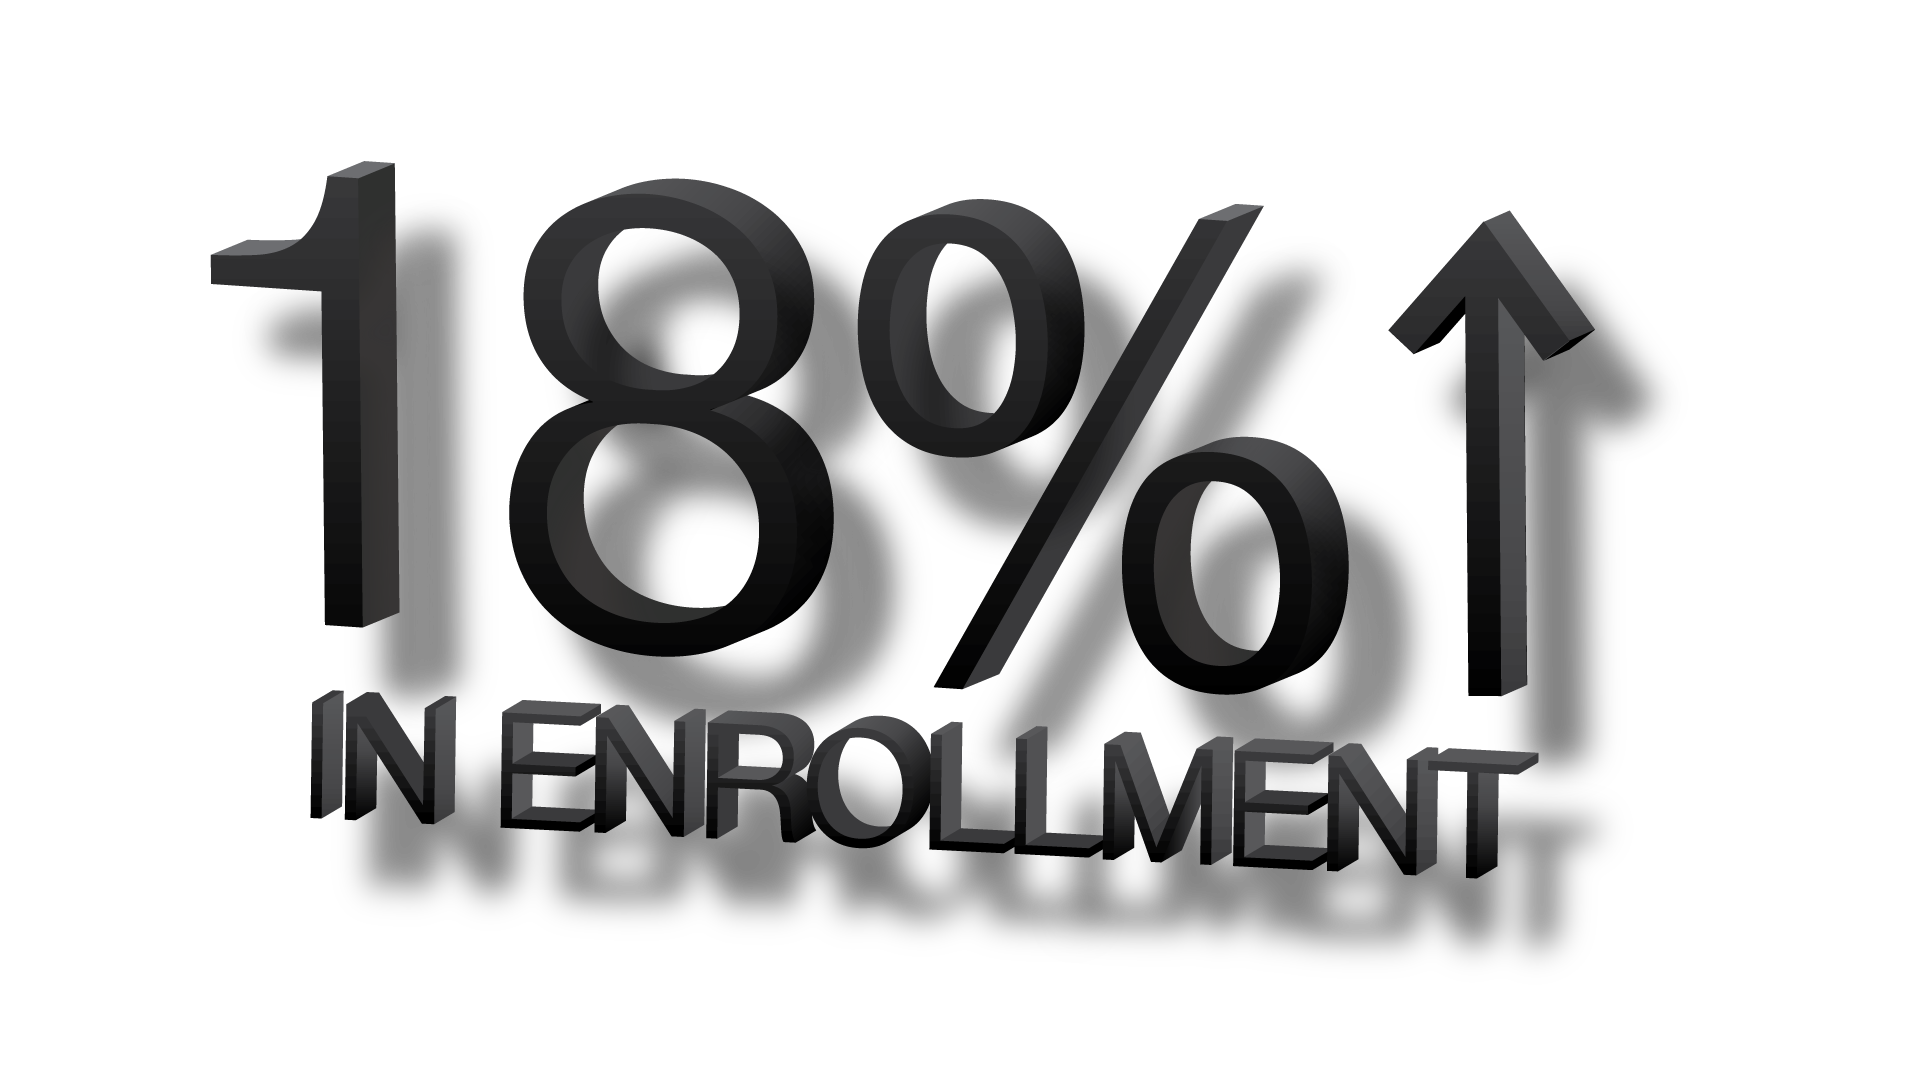 INCREASE IN ENROLLMENT FOR THE DIOCESE OF GRAND RAPIDS